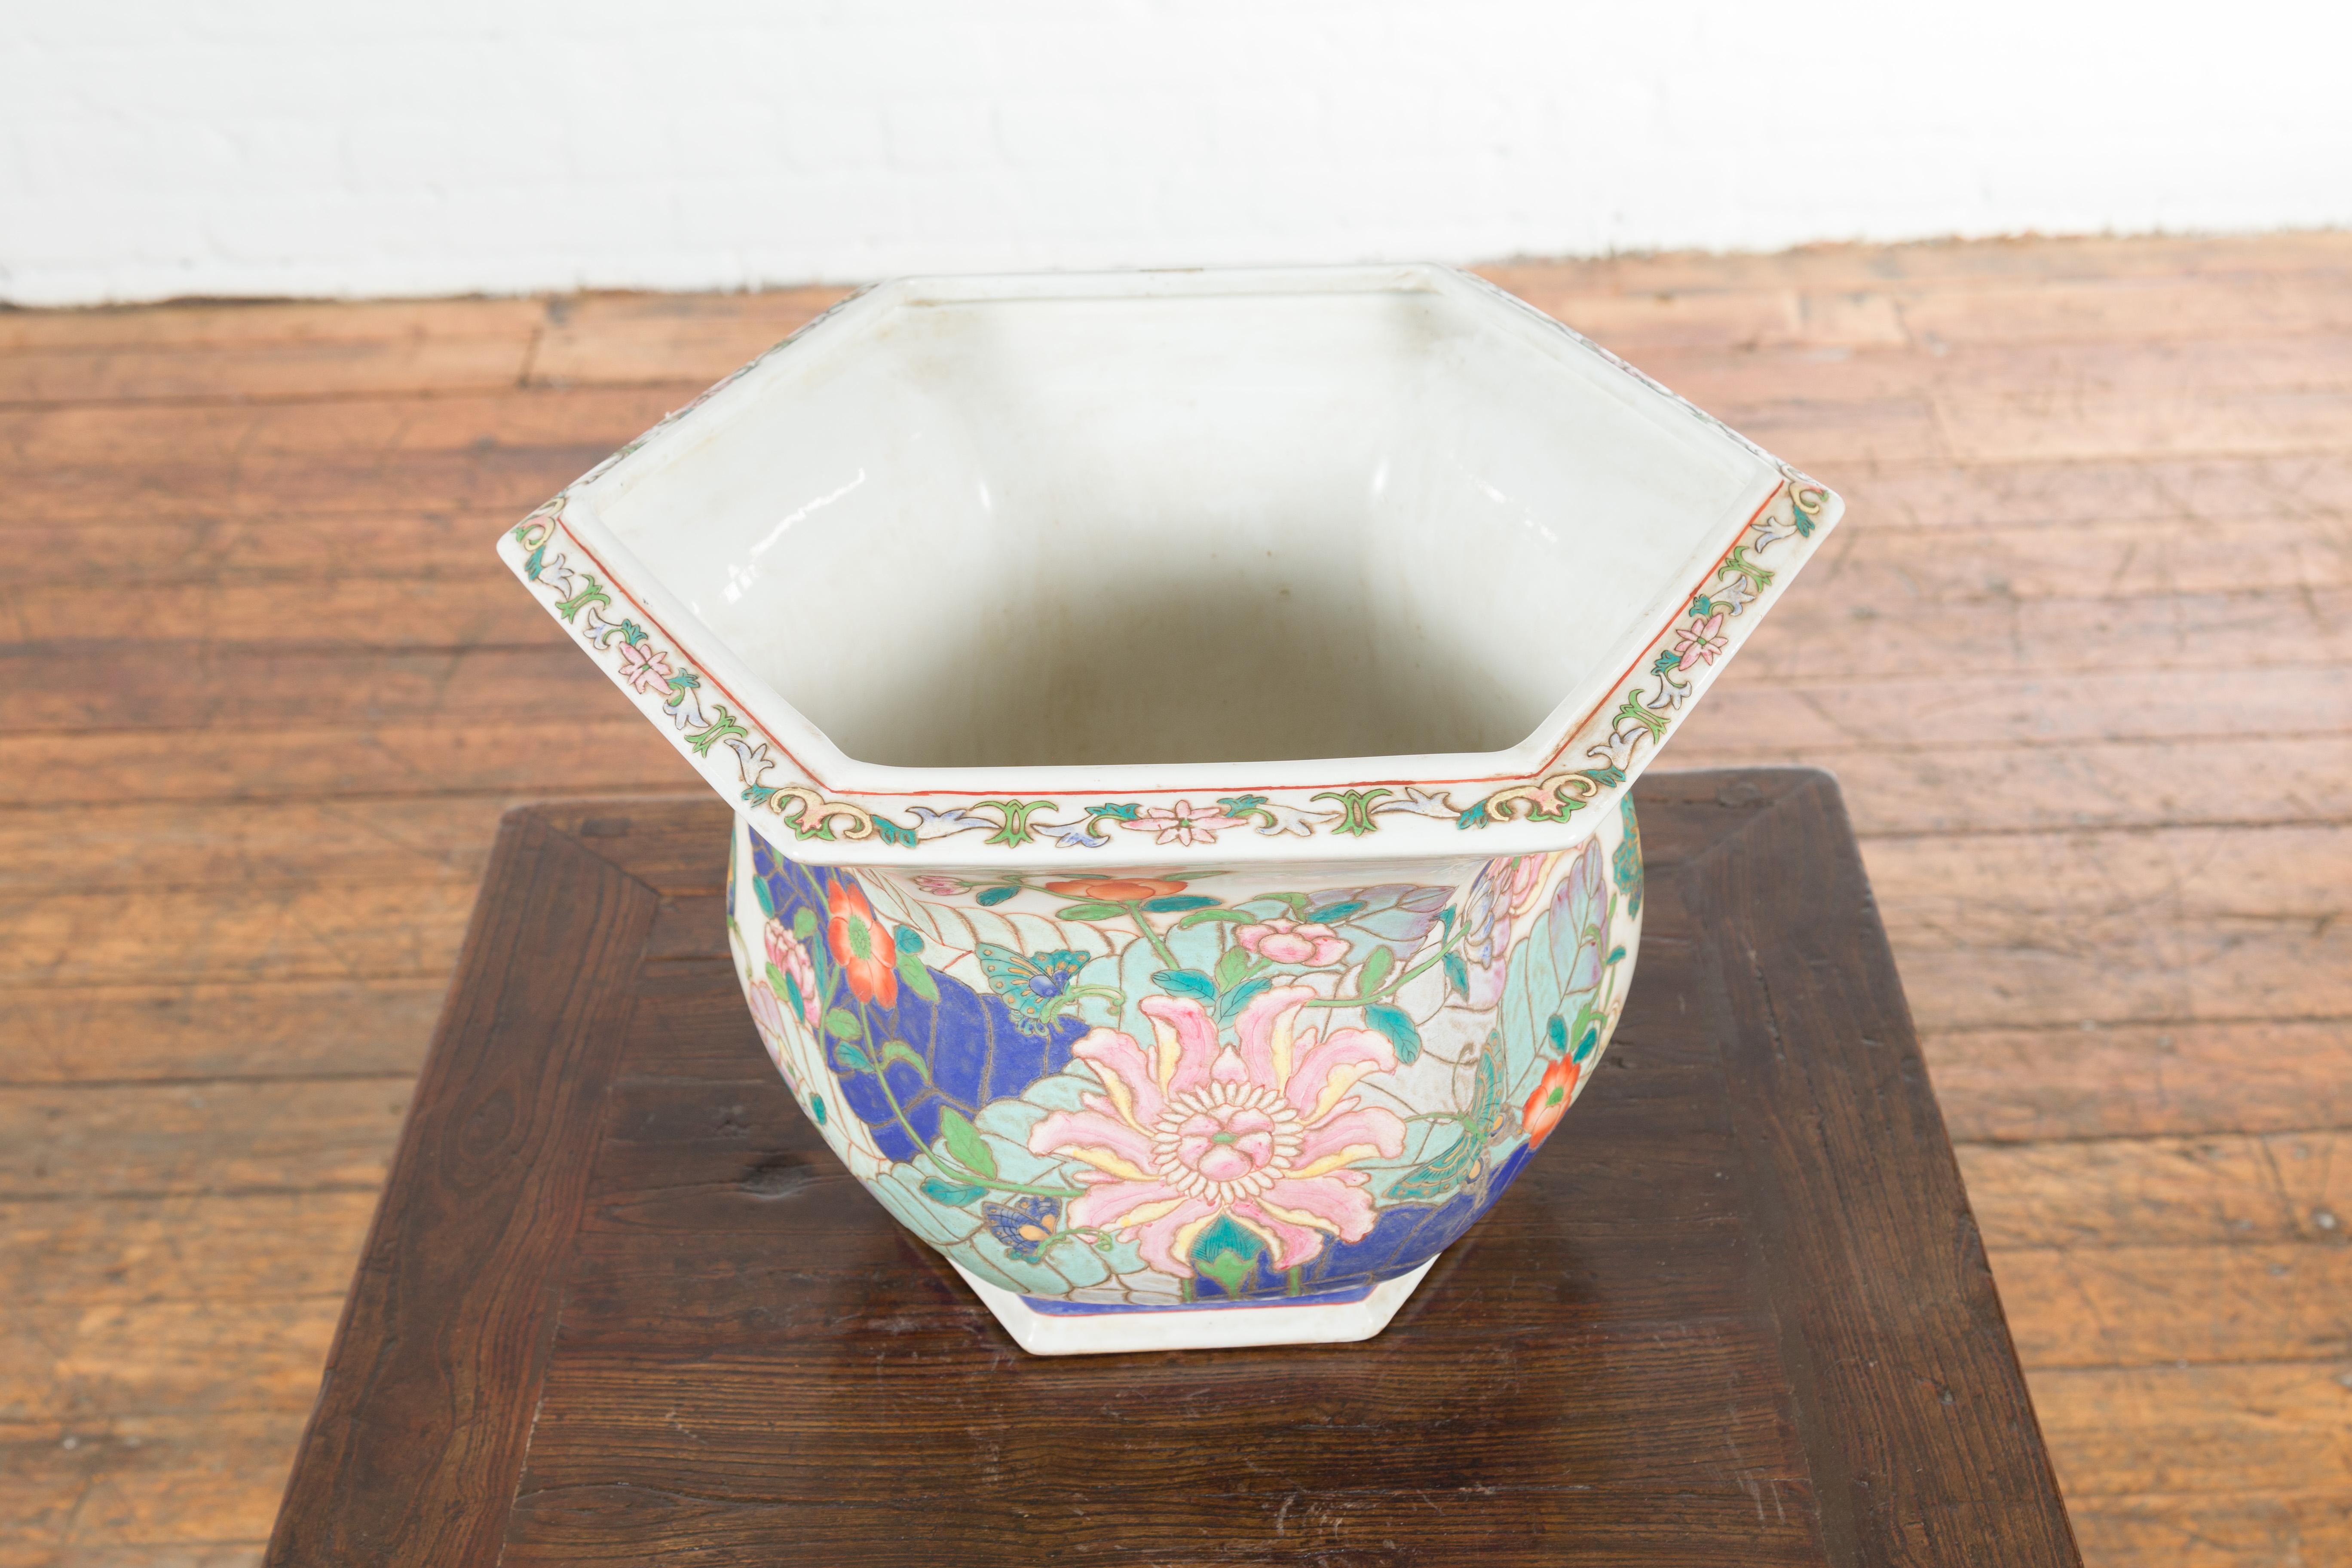 Ceramic Chinese Vintage Hexagonal Planter with Pastel Foliage, Flowers and Butterflies For Sale